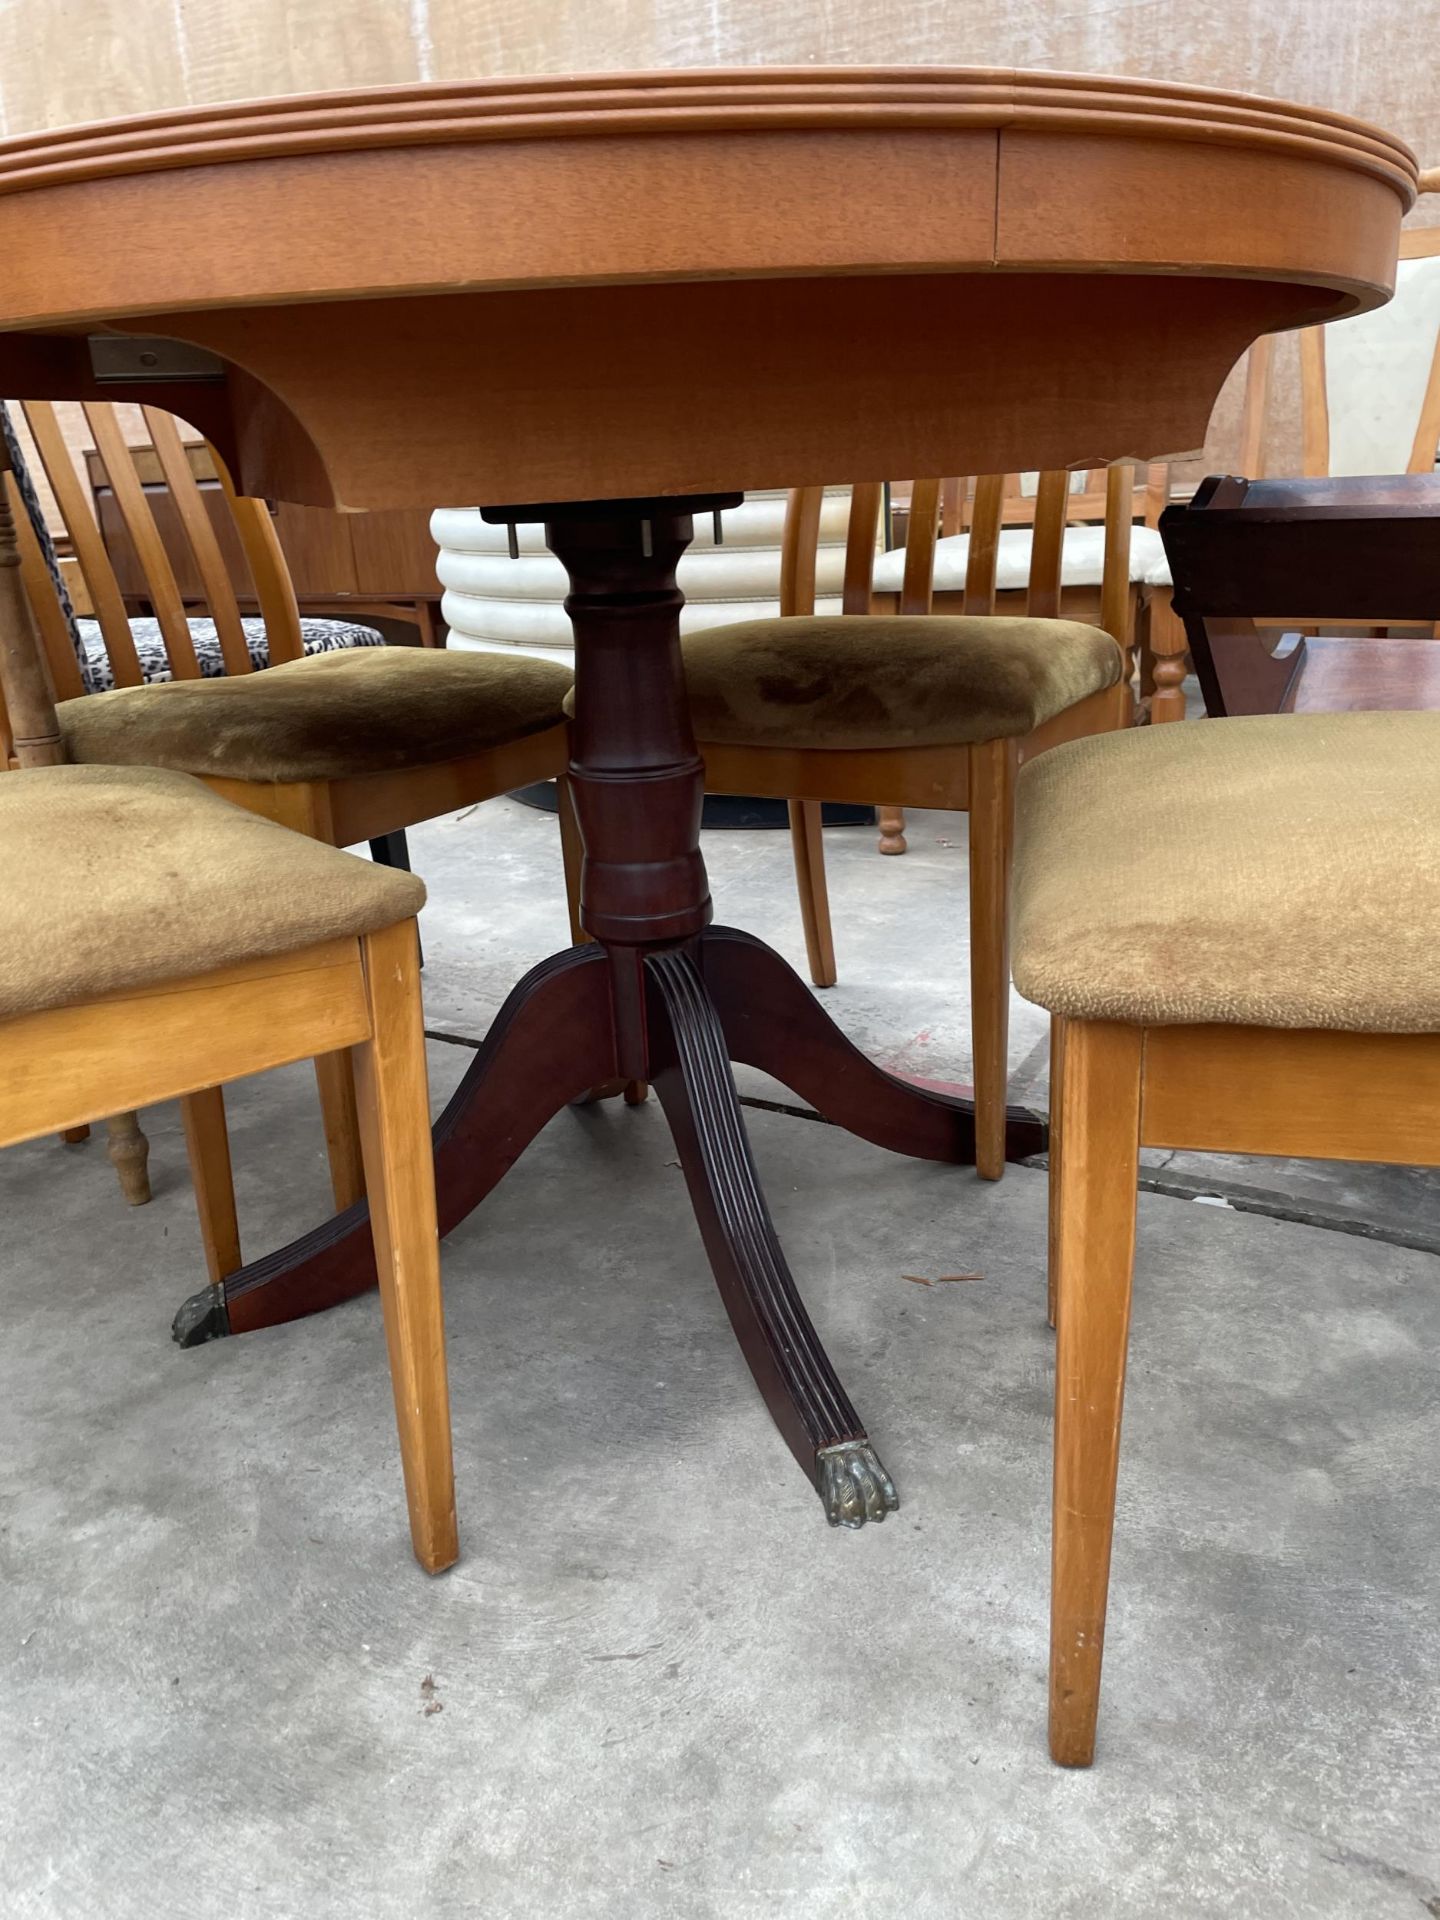 A YEW WOOD PEDESTAL DINING TABLE AND FOUR CHAIRS - Image 2 of 5